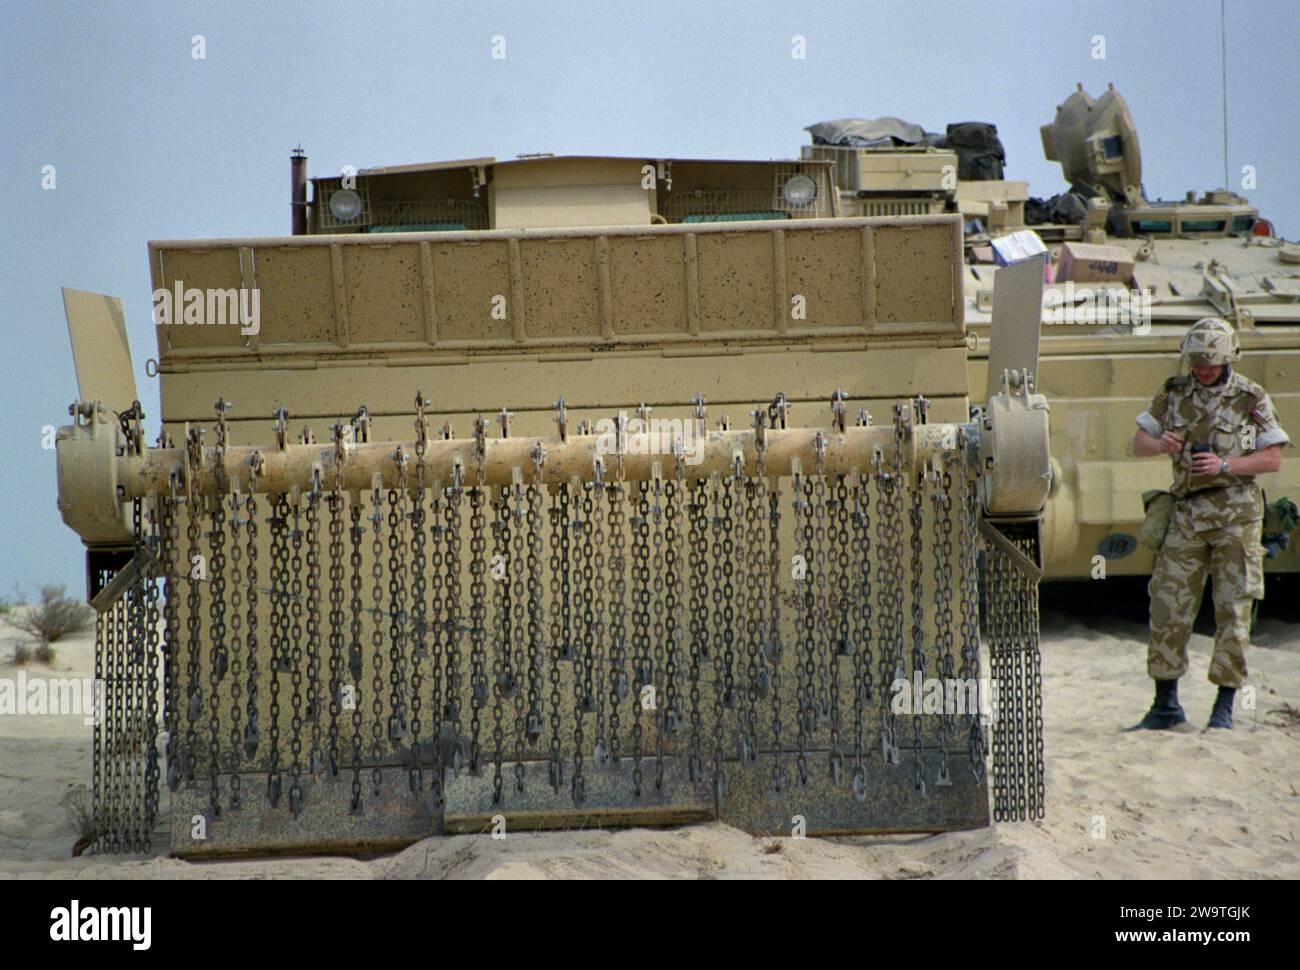 14th January 1991 A British Army Aardvark JSFU (Joint Services Flail Unit) mine-clearance vehicle north of Dhahran in Saudi Arabia. Stock Photo